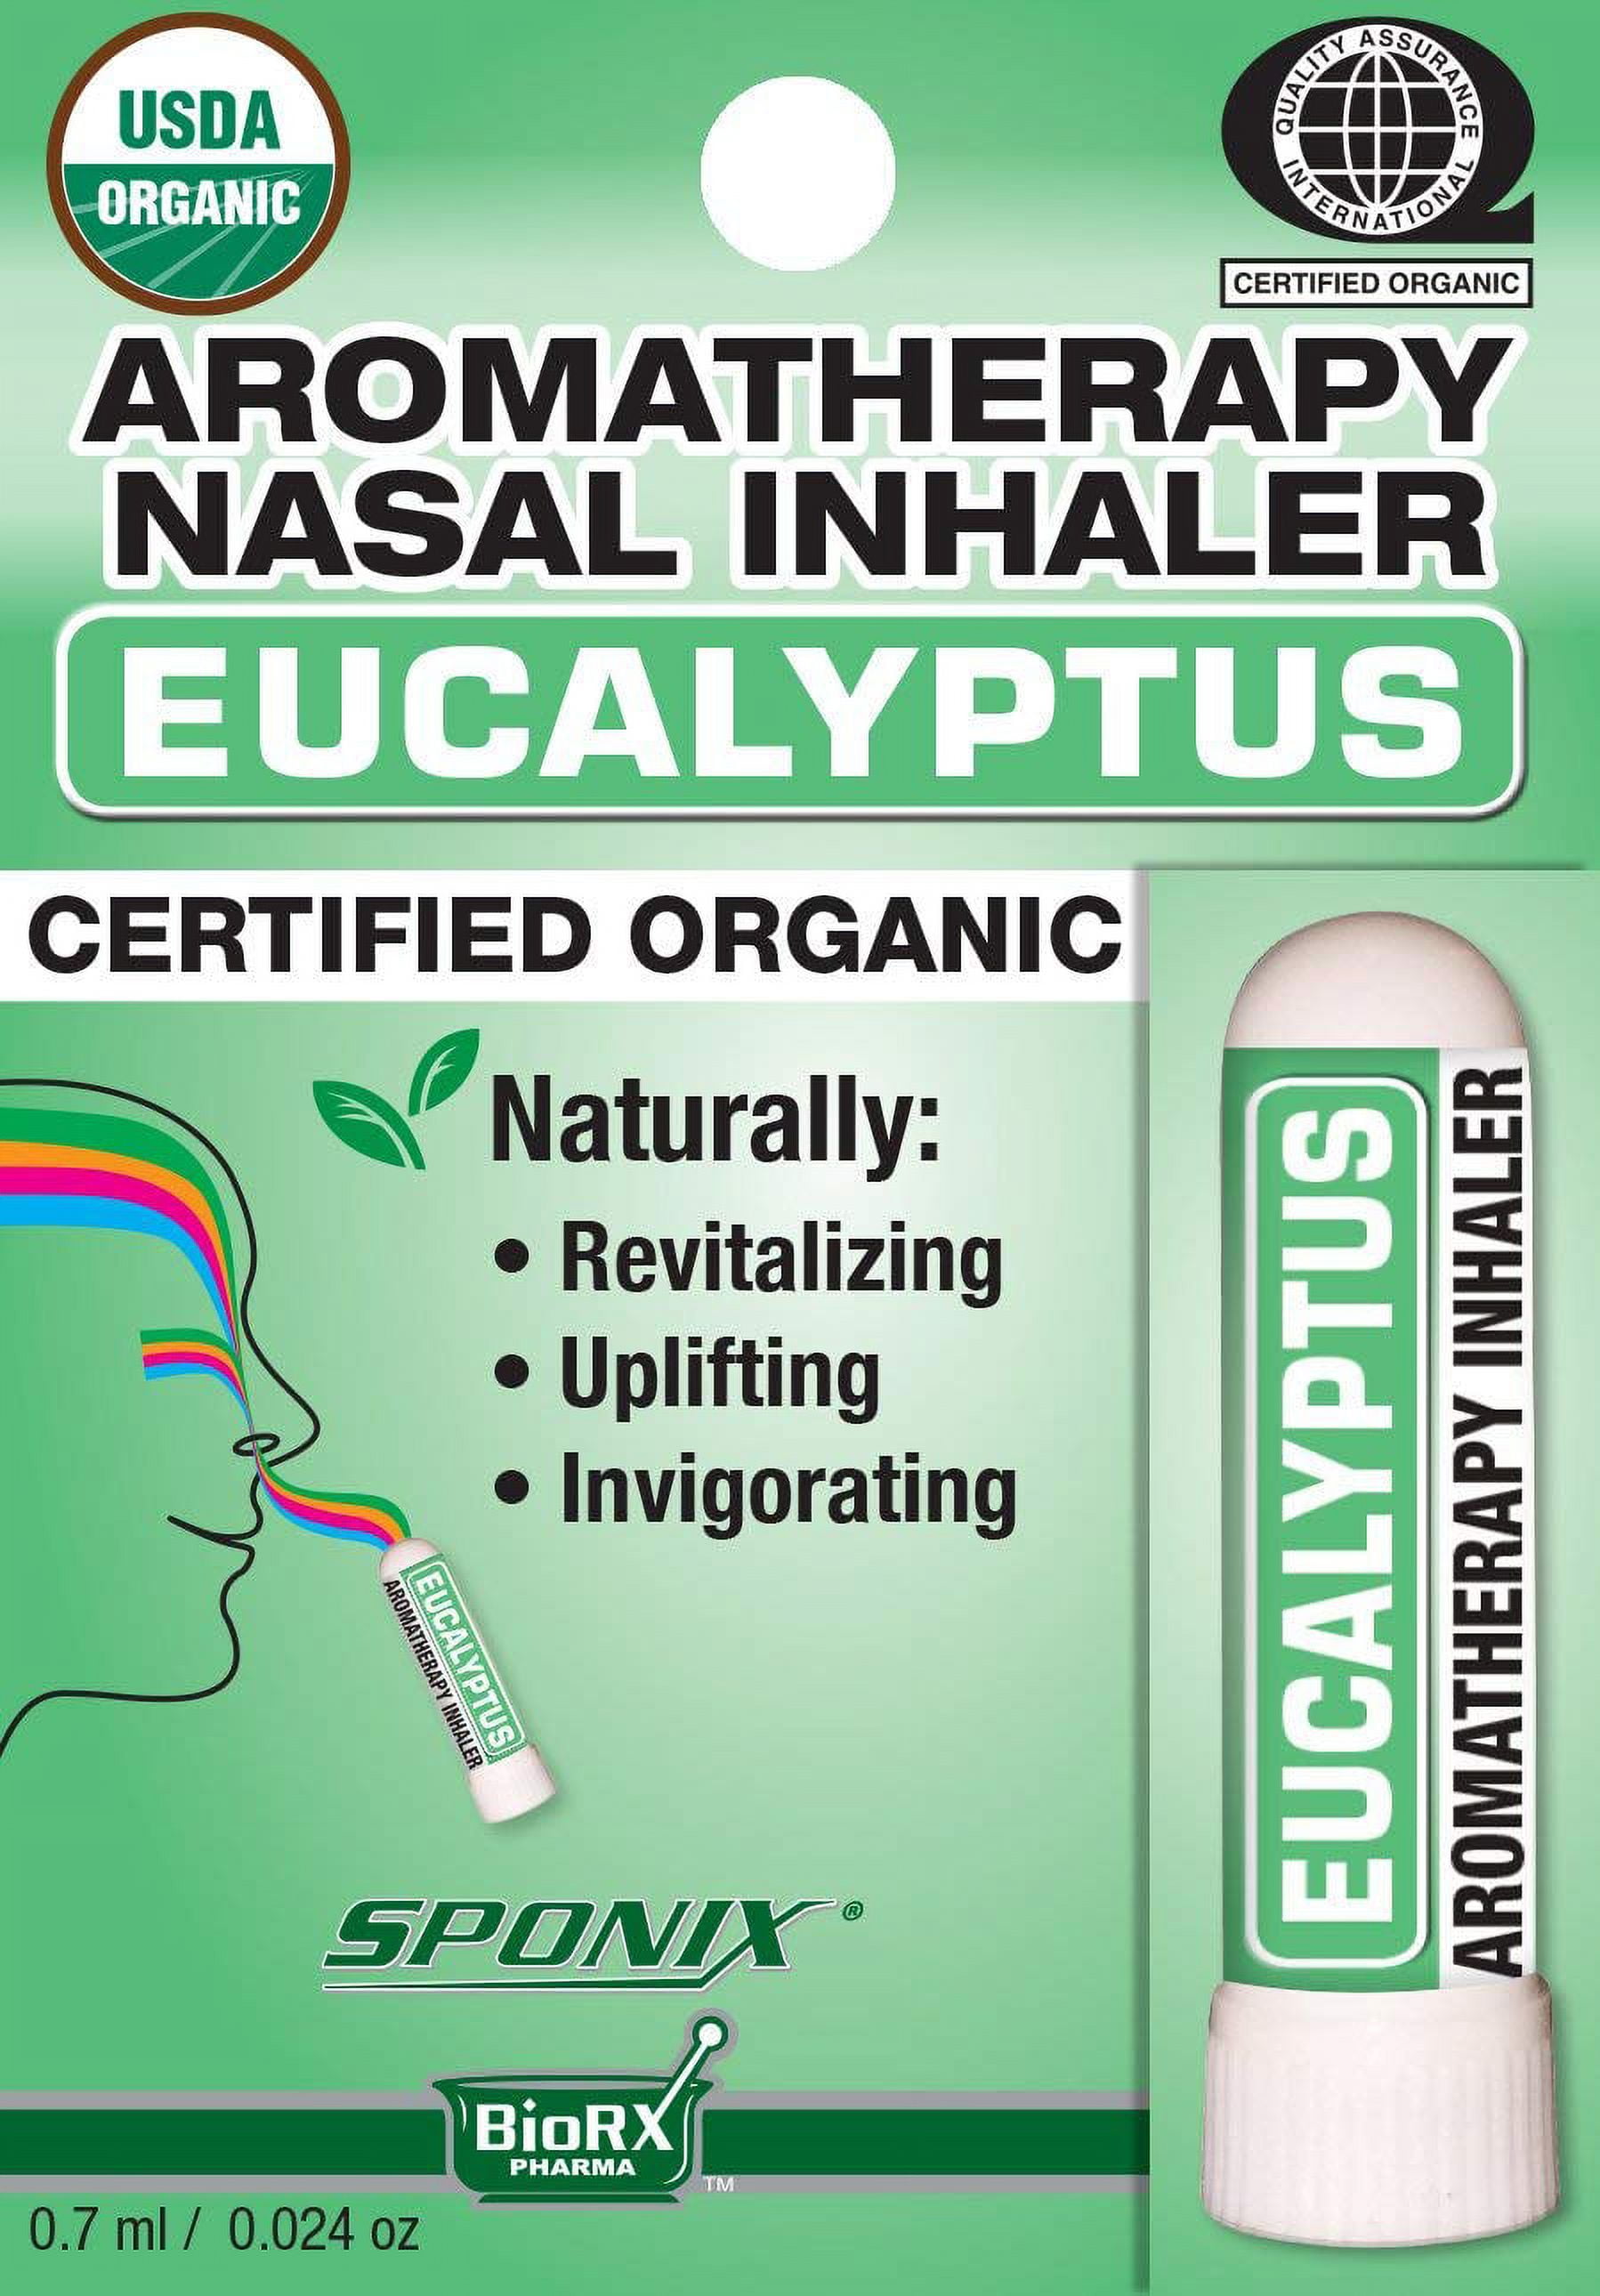 Nasal Inhaler Aromatherapy Eucalyptus - USDA Certified Organic - Made with  100% Pure - Therapeutic Grade Organic Essential Oils 0.7 mL by Sponix Made  in USA 